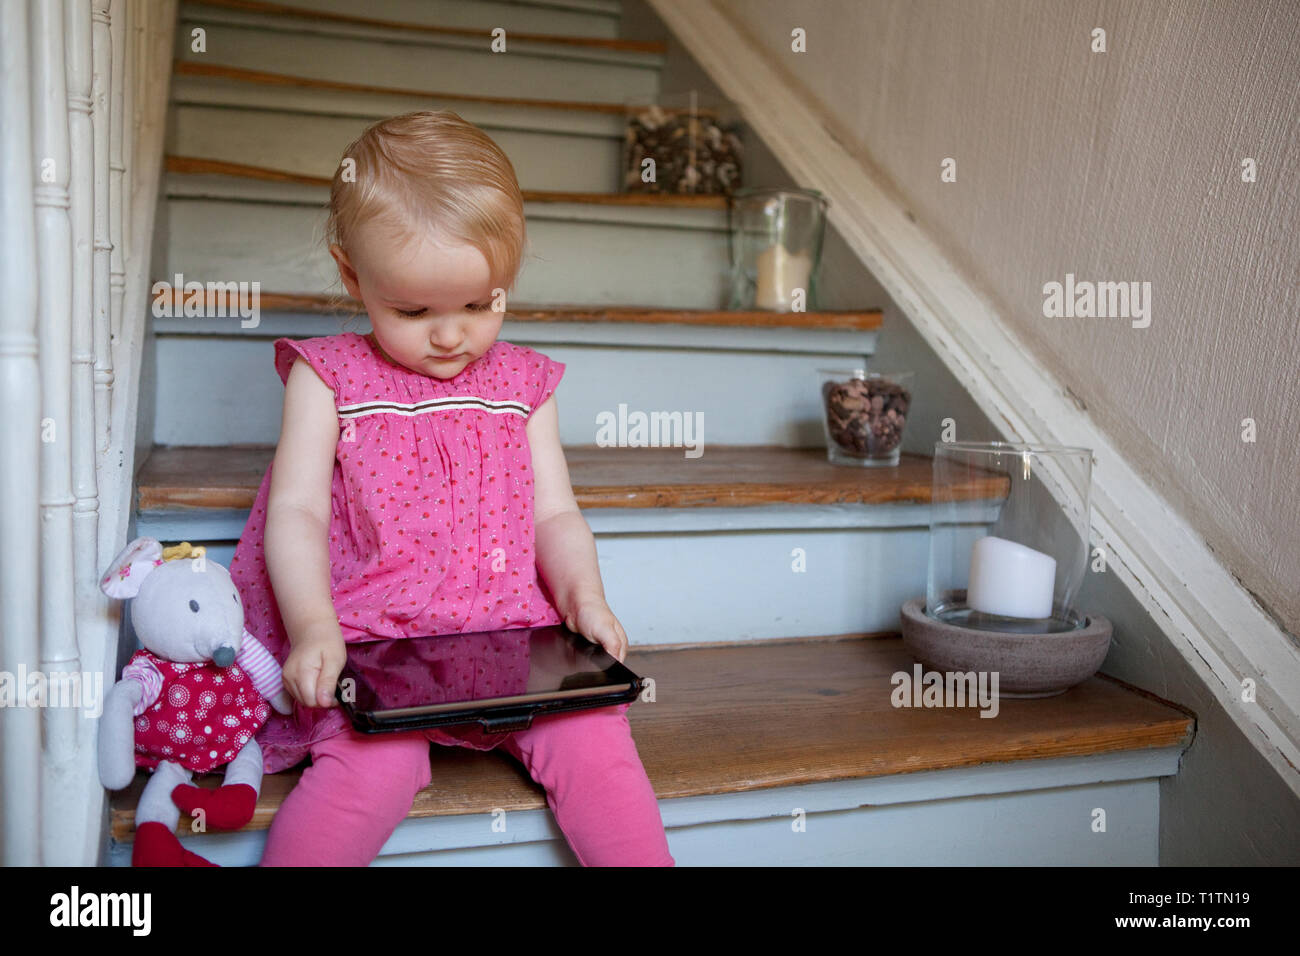 Toddler sitting on steps in a house and looking at a portable tablet device Stock Photo